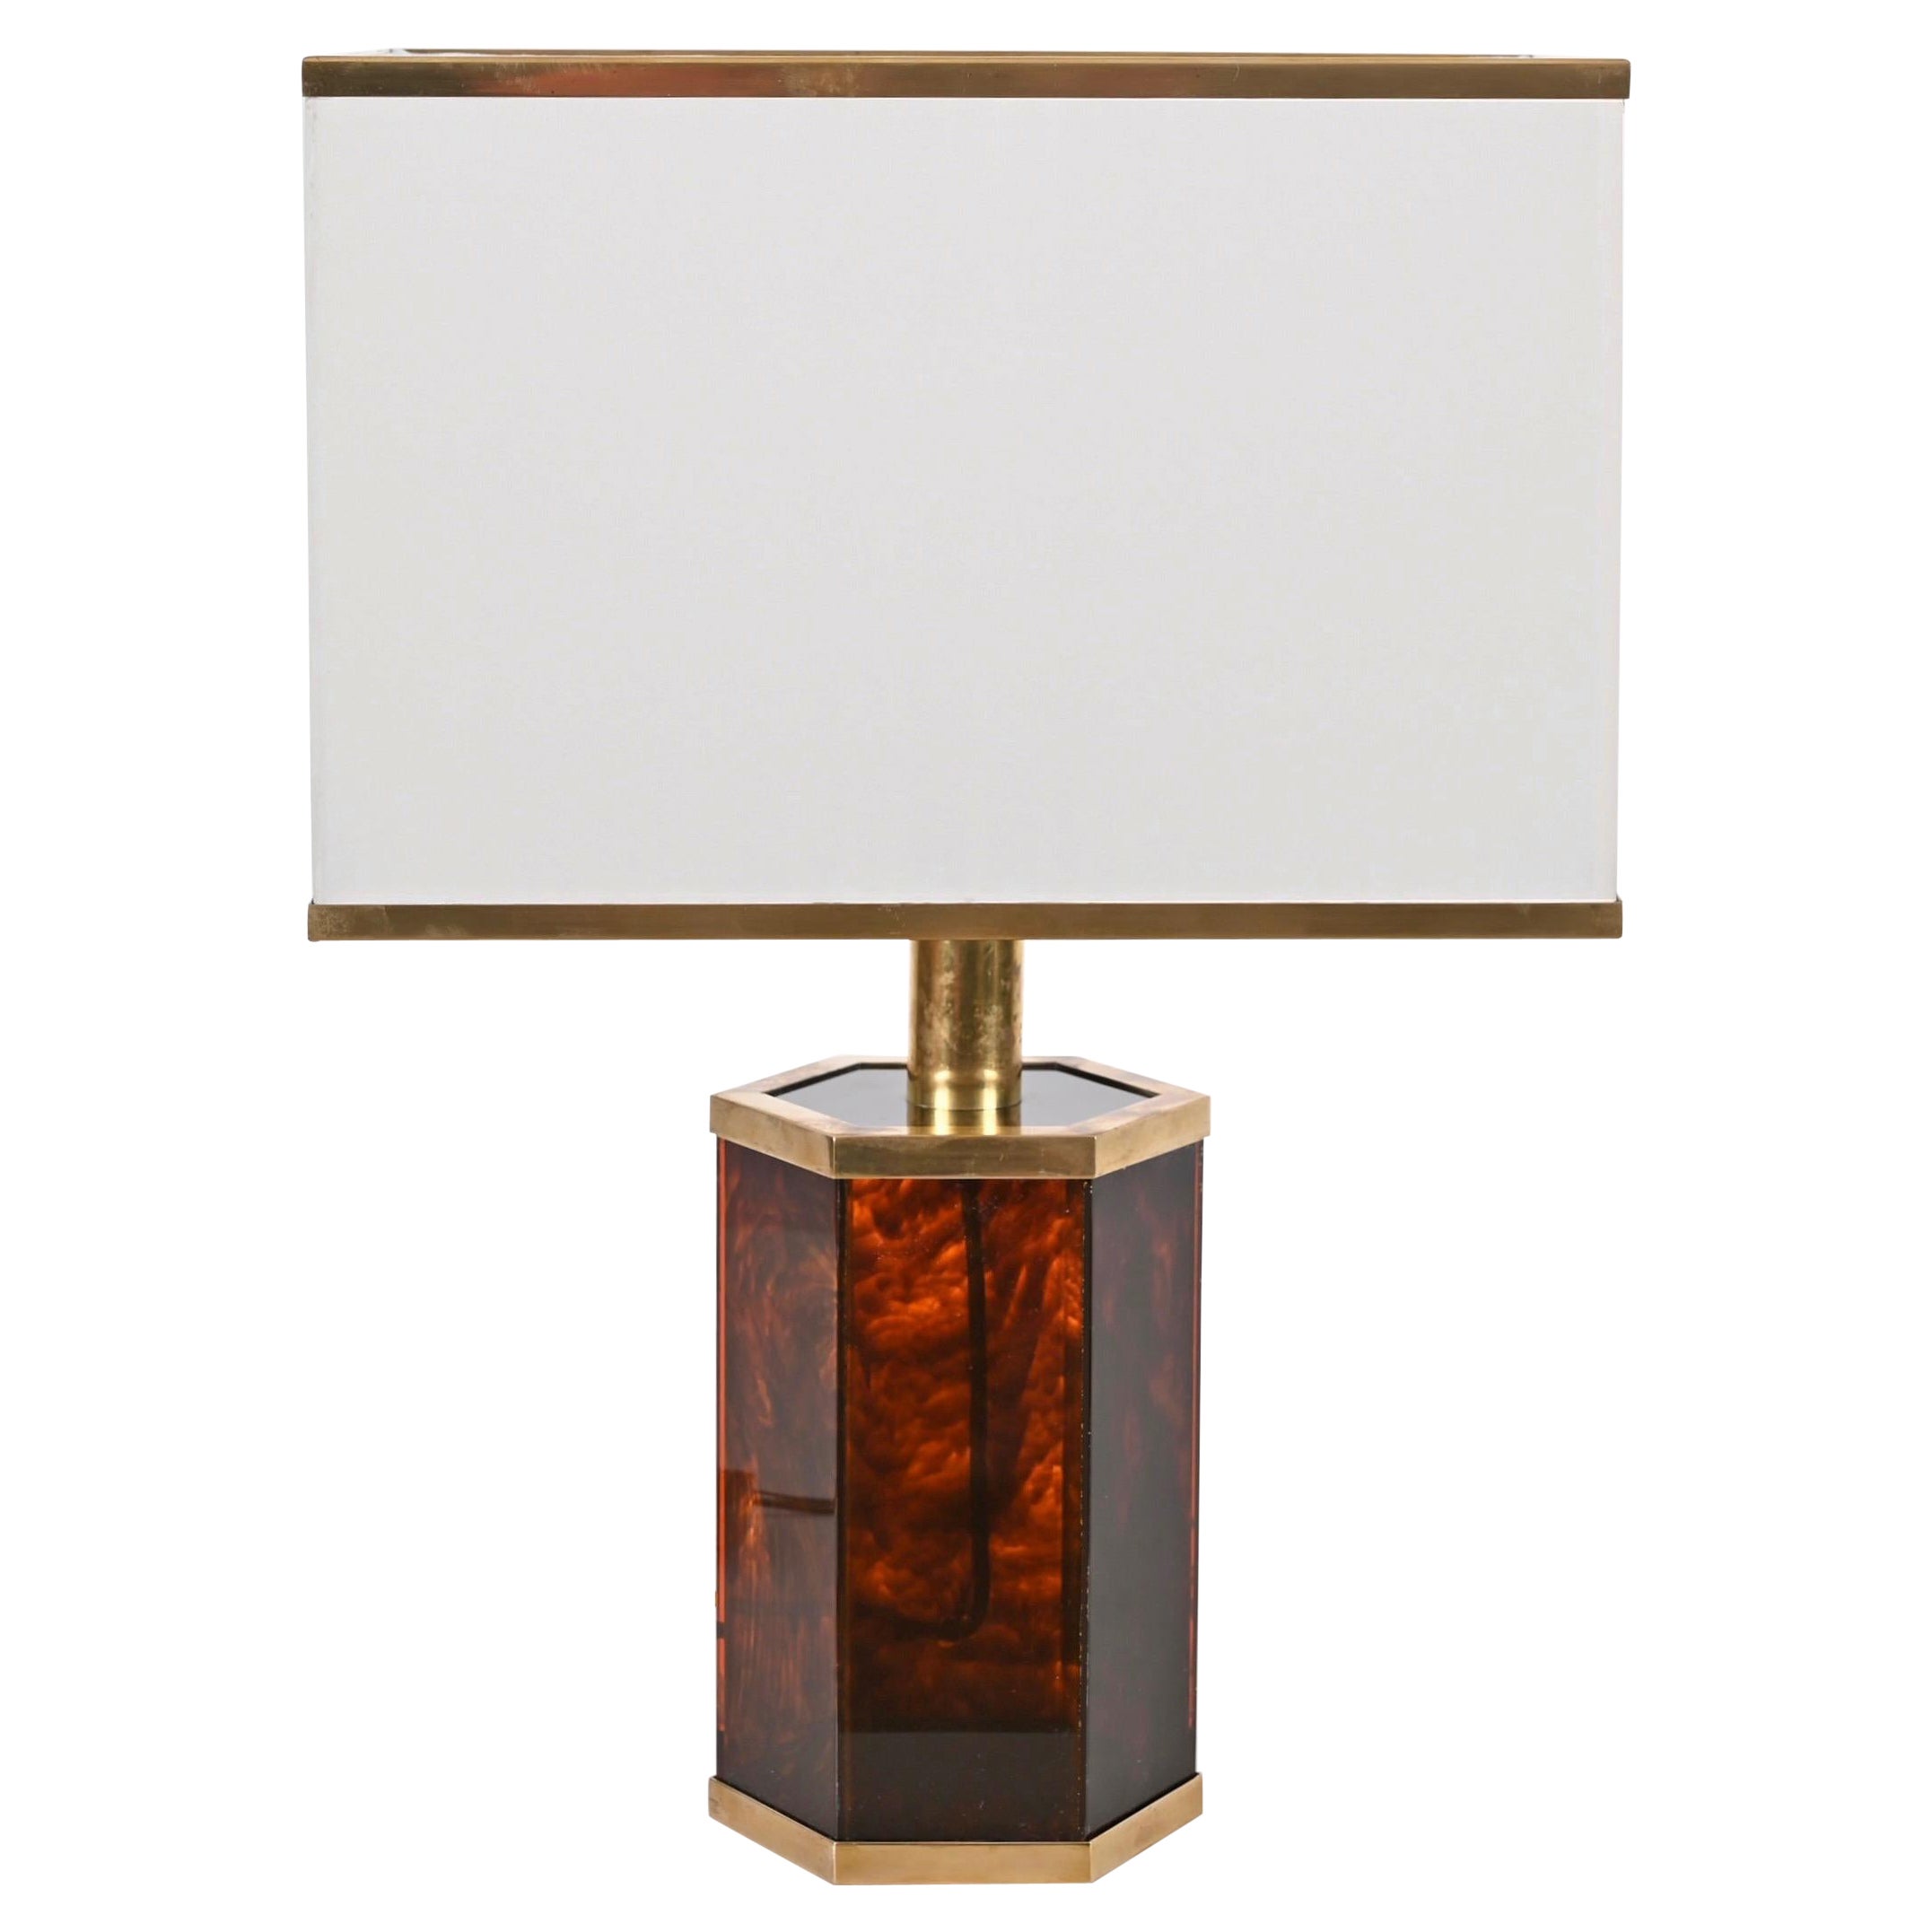 Willy Rizzo, Italian Table Lamp in Tortoiseshell Effect Lucite and Brass, 1970s For Sale